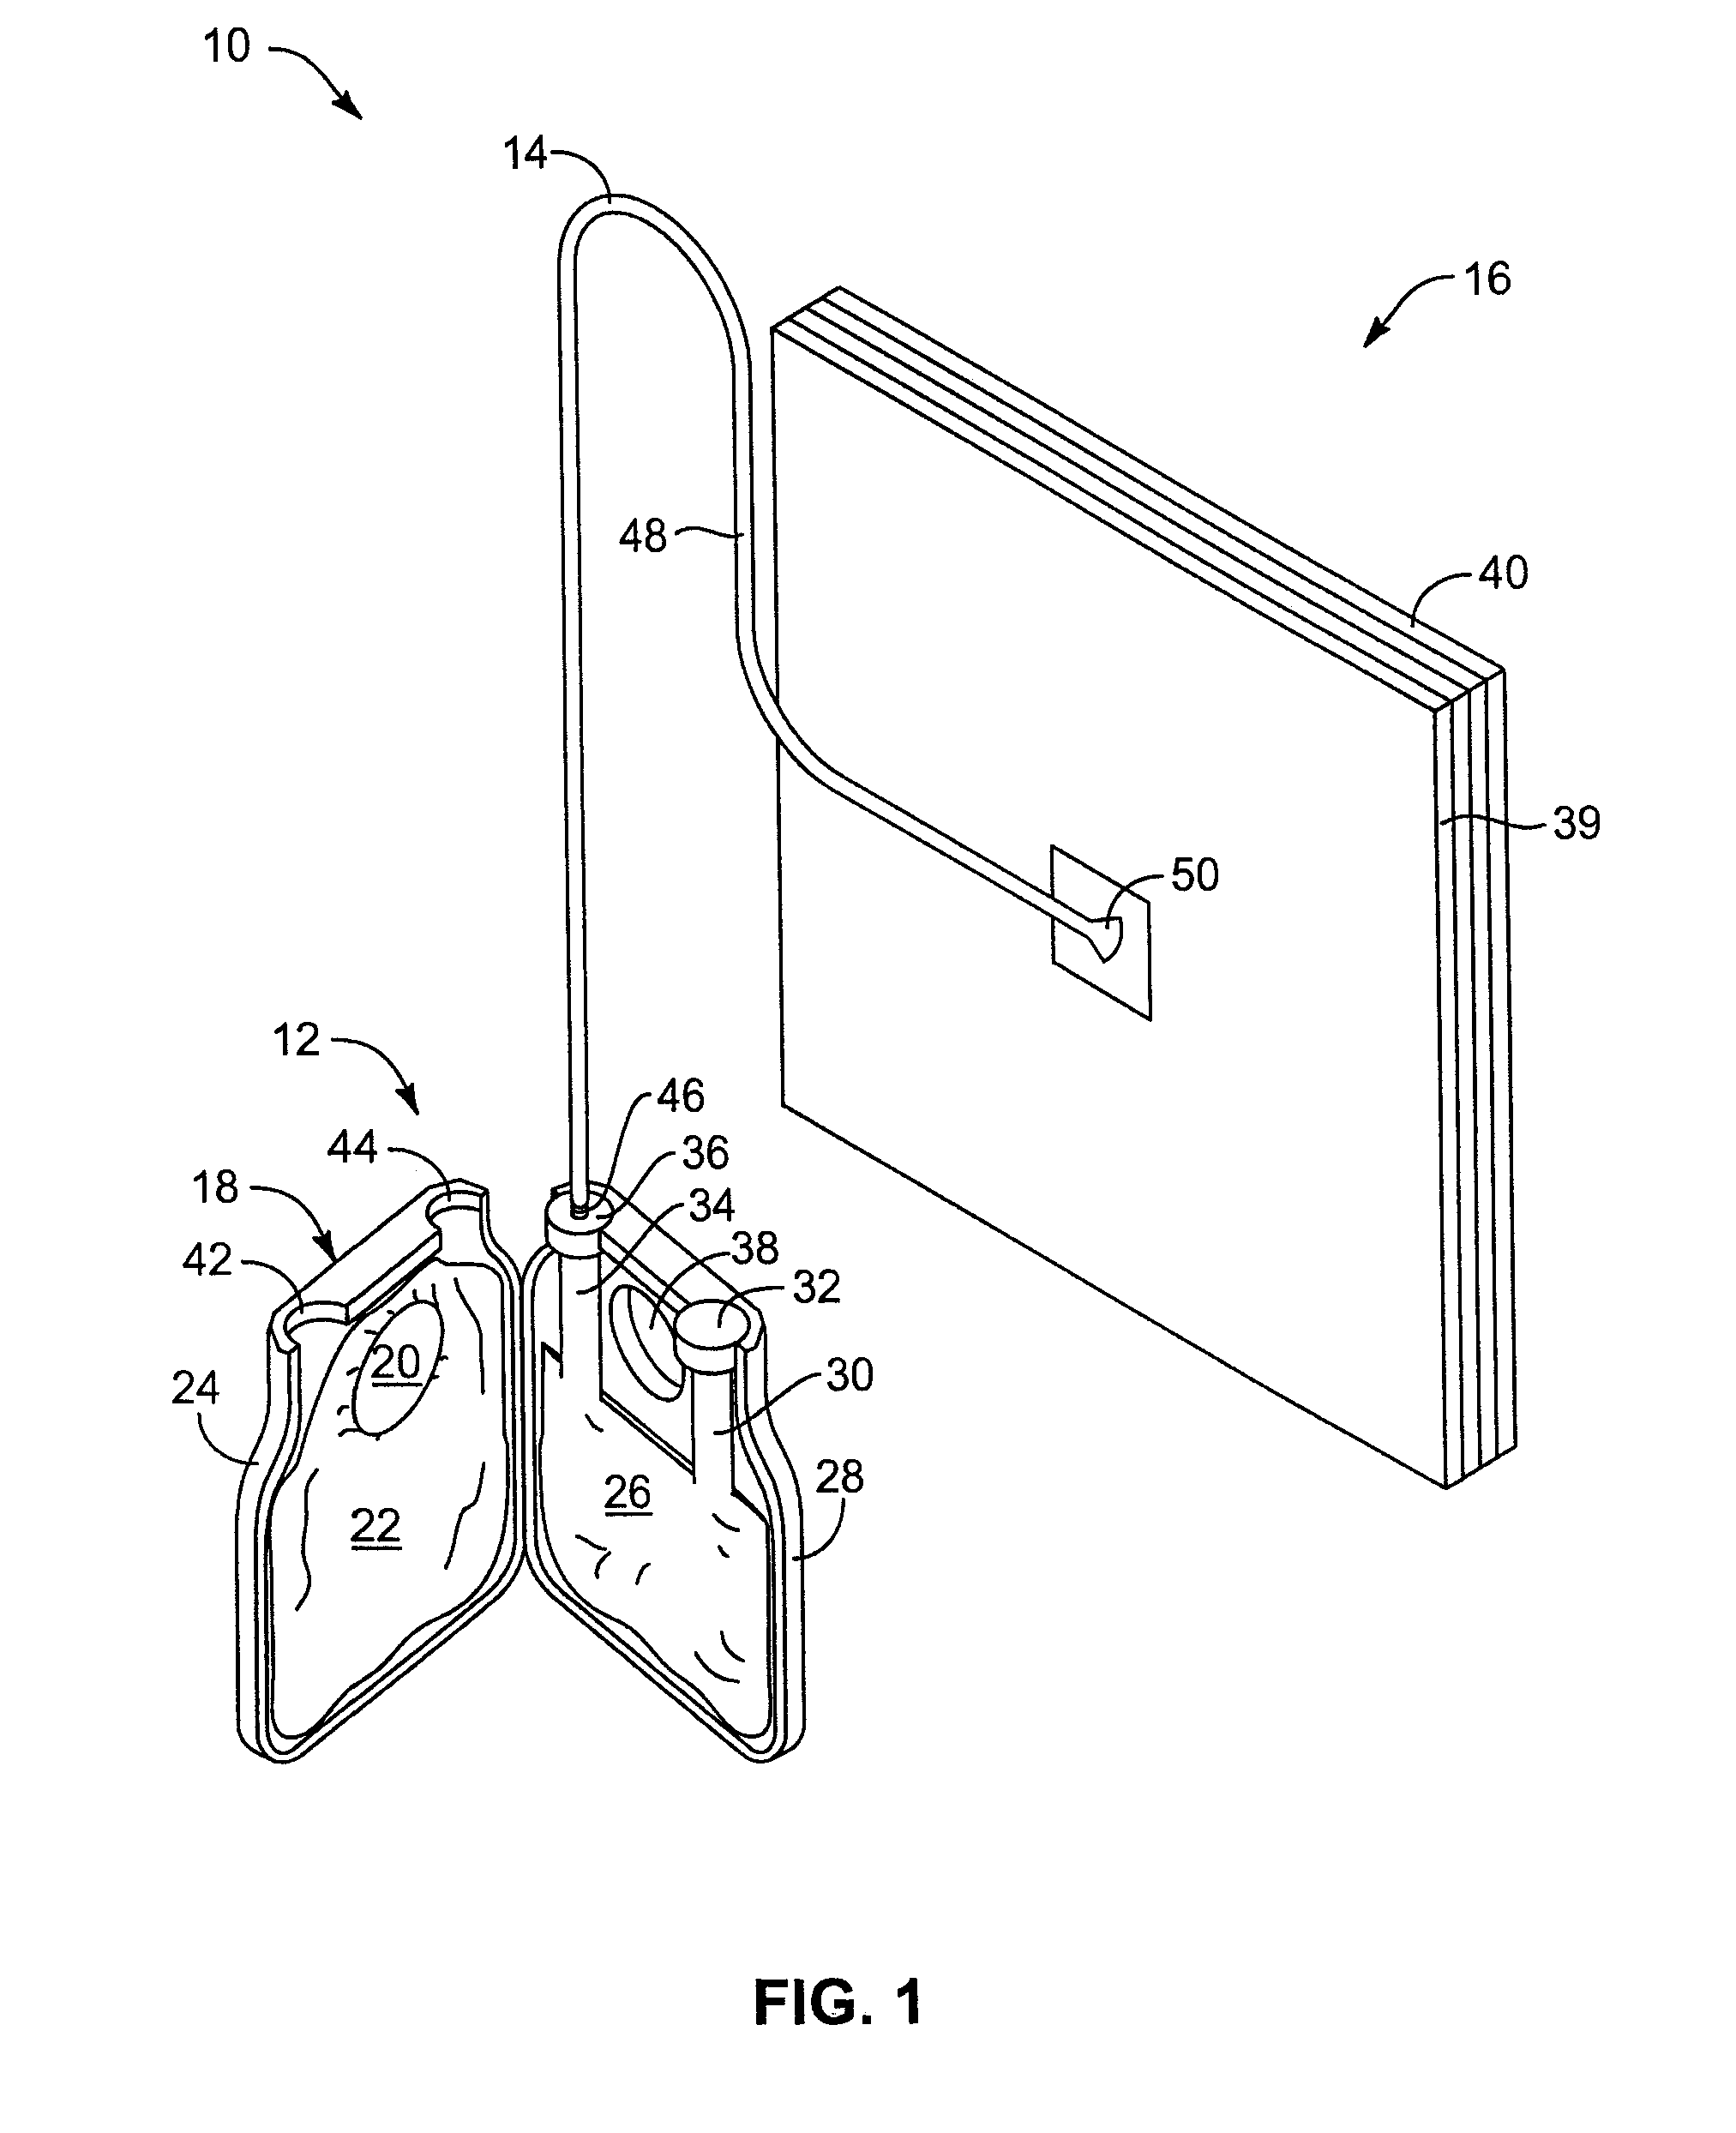 Auto-replenishing, wound-dressing apparatus and method